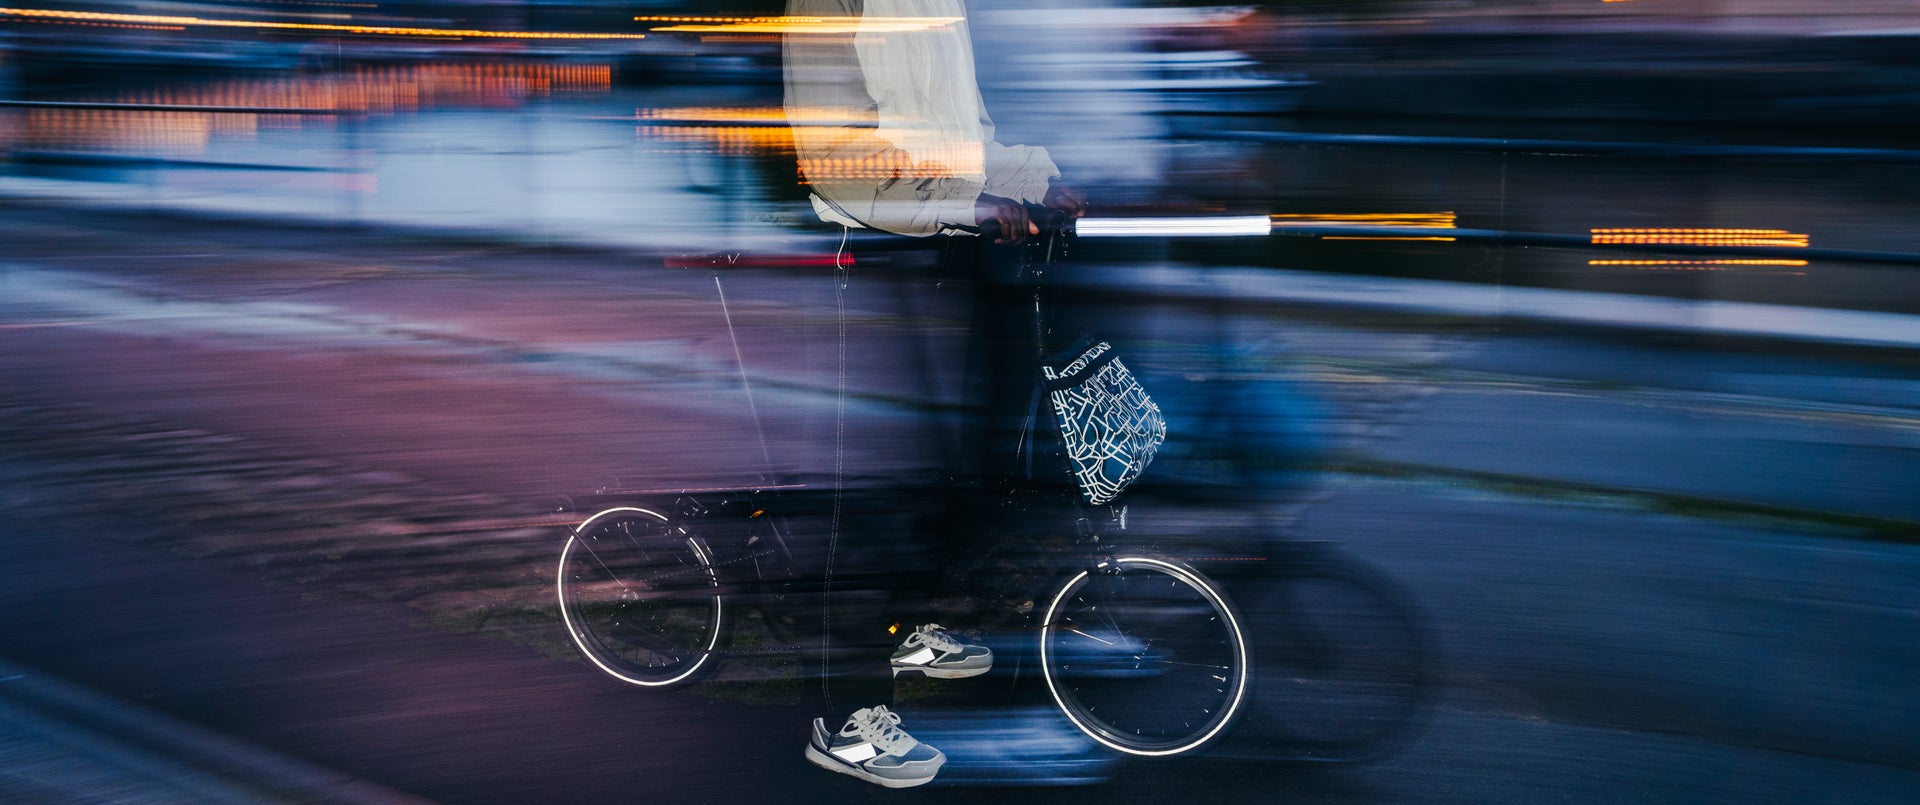 An artistic photograph of the Bright Night luggage attached to a Brompton folding bike with a Front Carrier Block